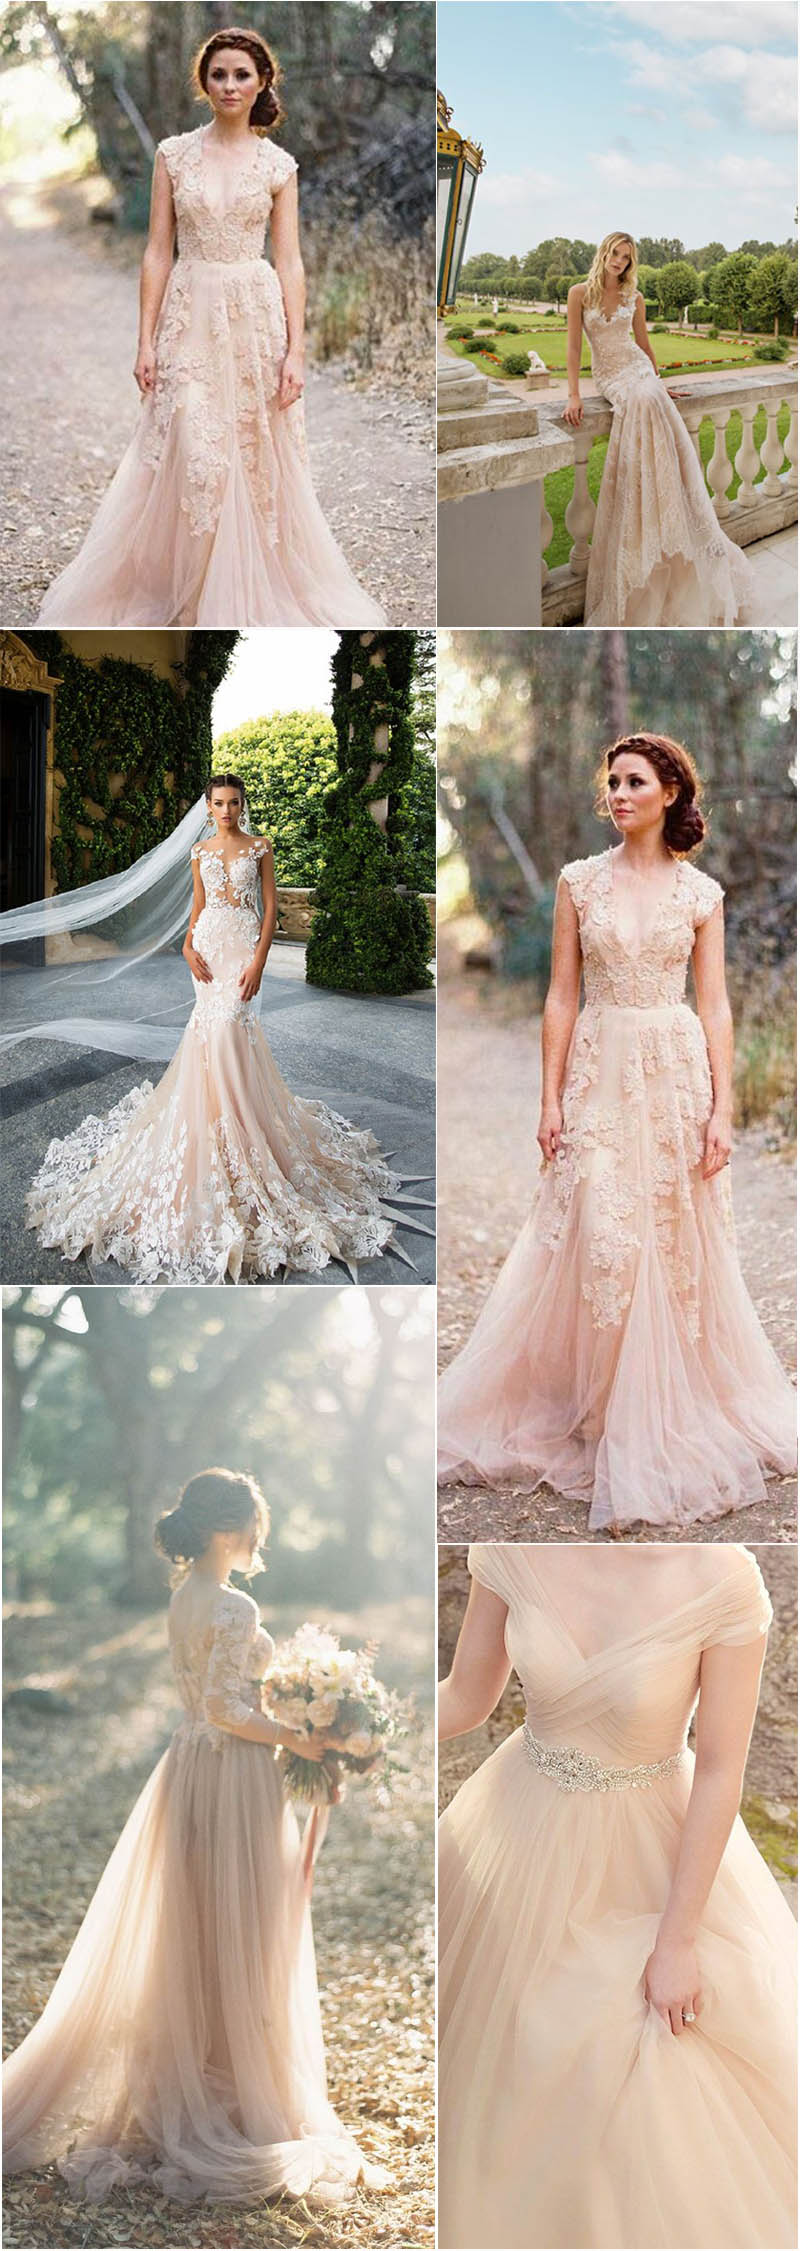 Champagne wedding dresses ideas you may like it